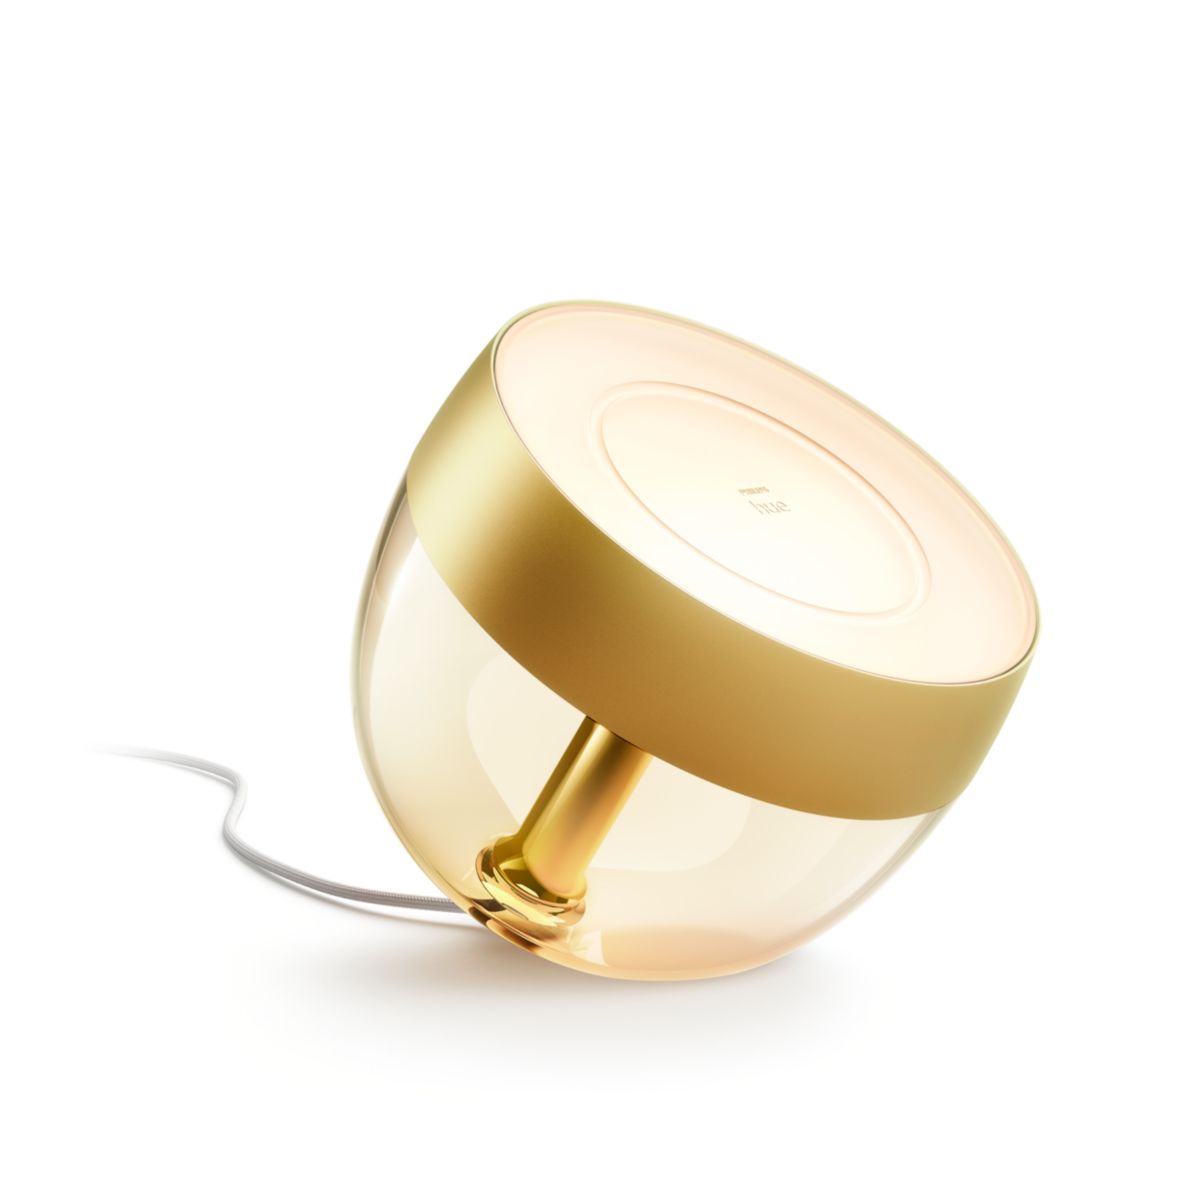 Philips Hue Iris goud special idition